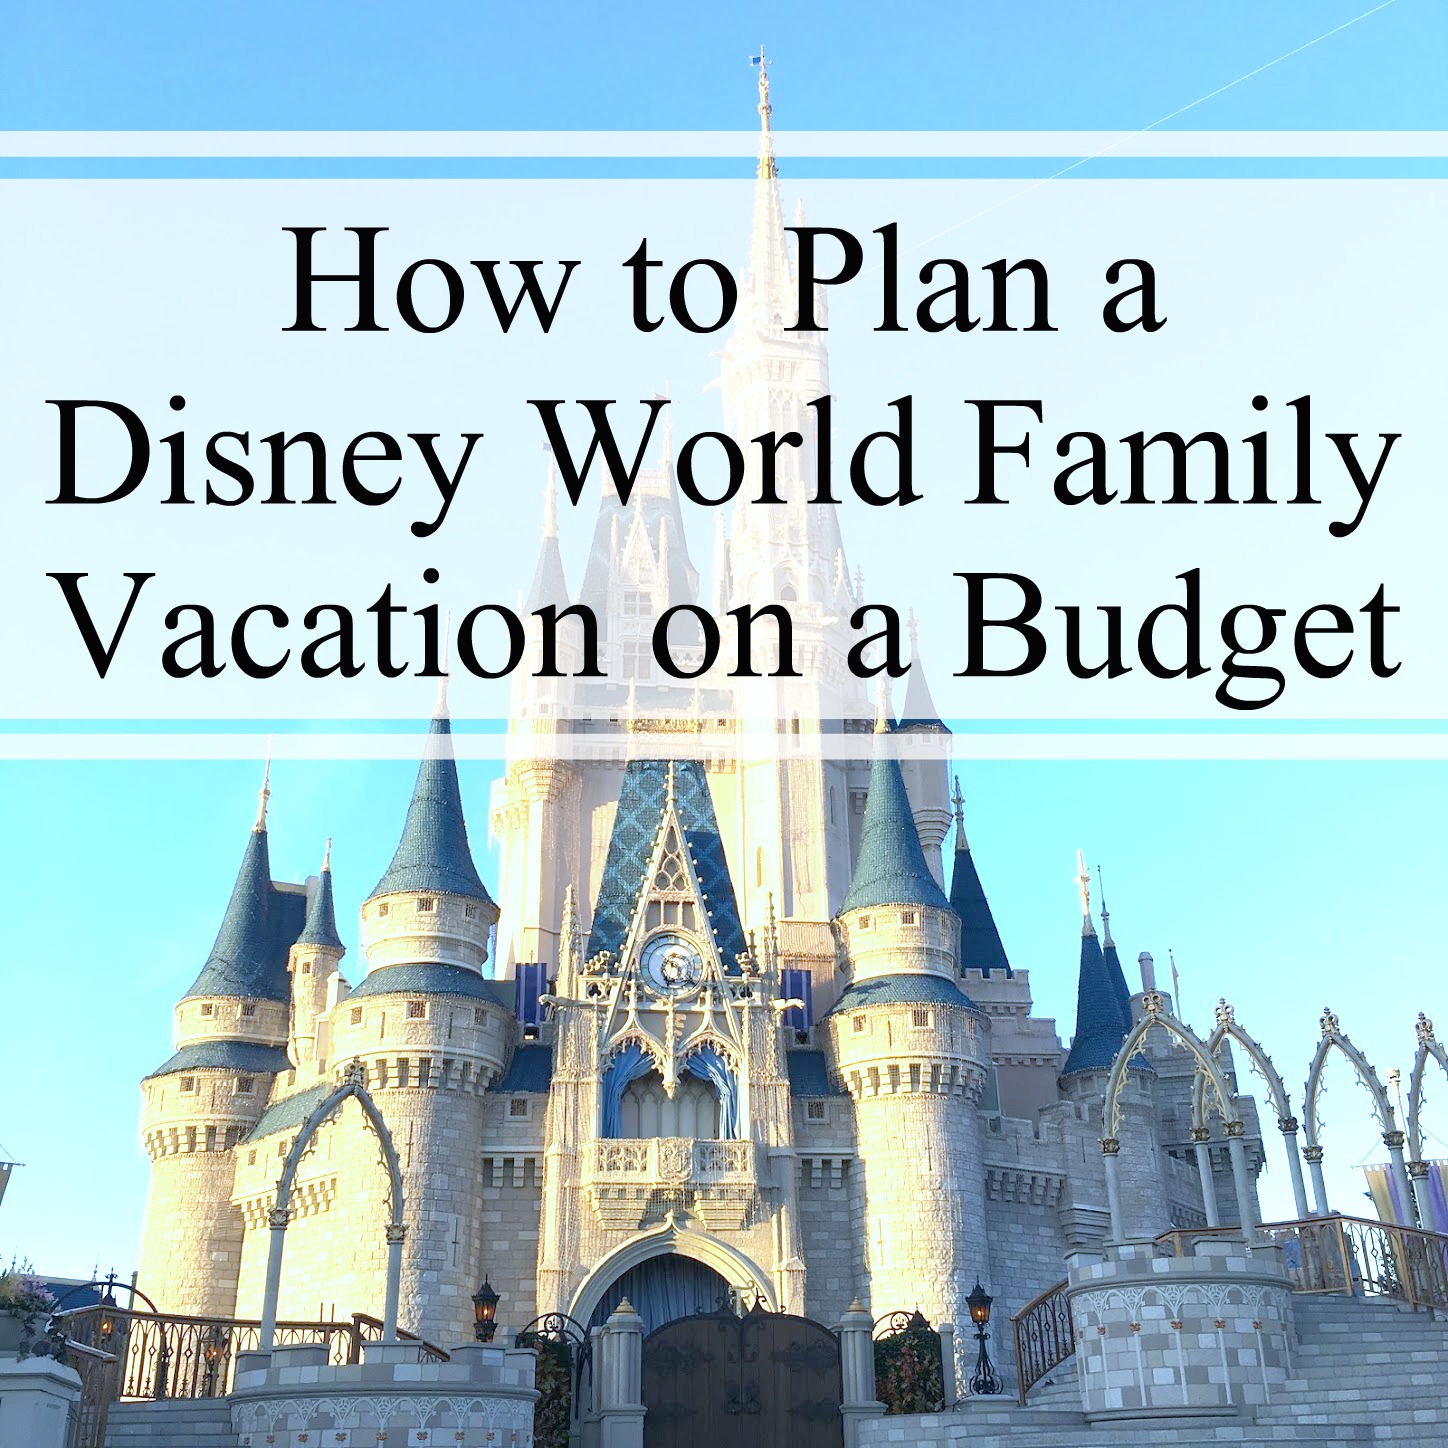 How to Plan a Disney World Vacation on a Budget